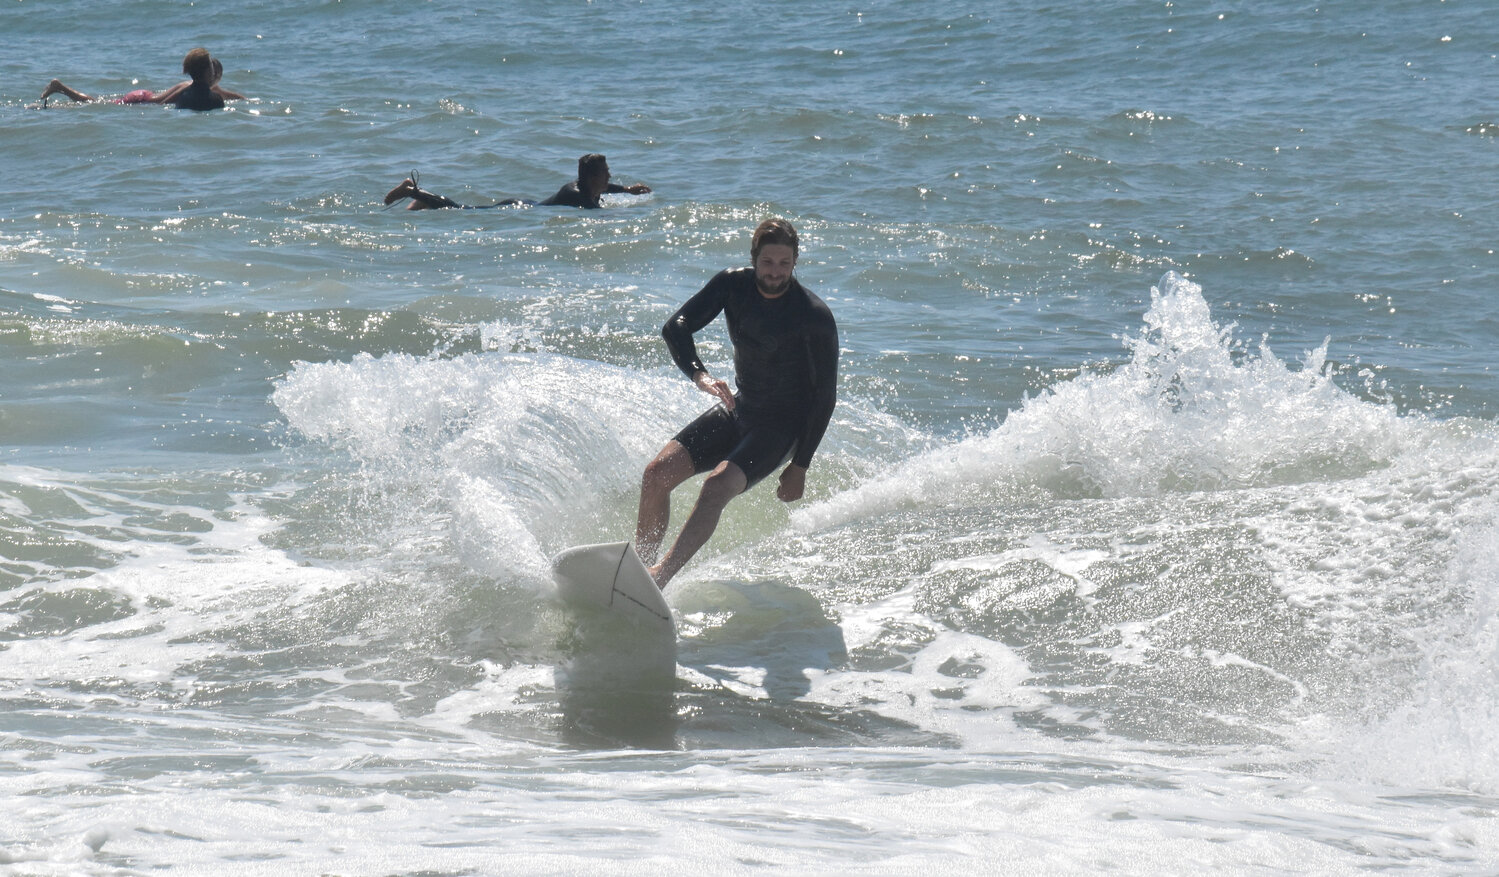 With a high surf advisory in effect, dozens of surfers hit the water along the south shore Friday.